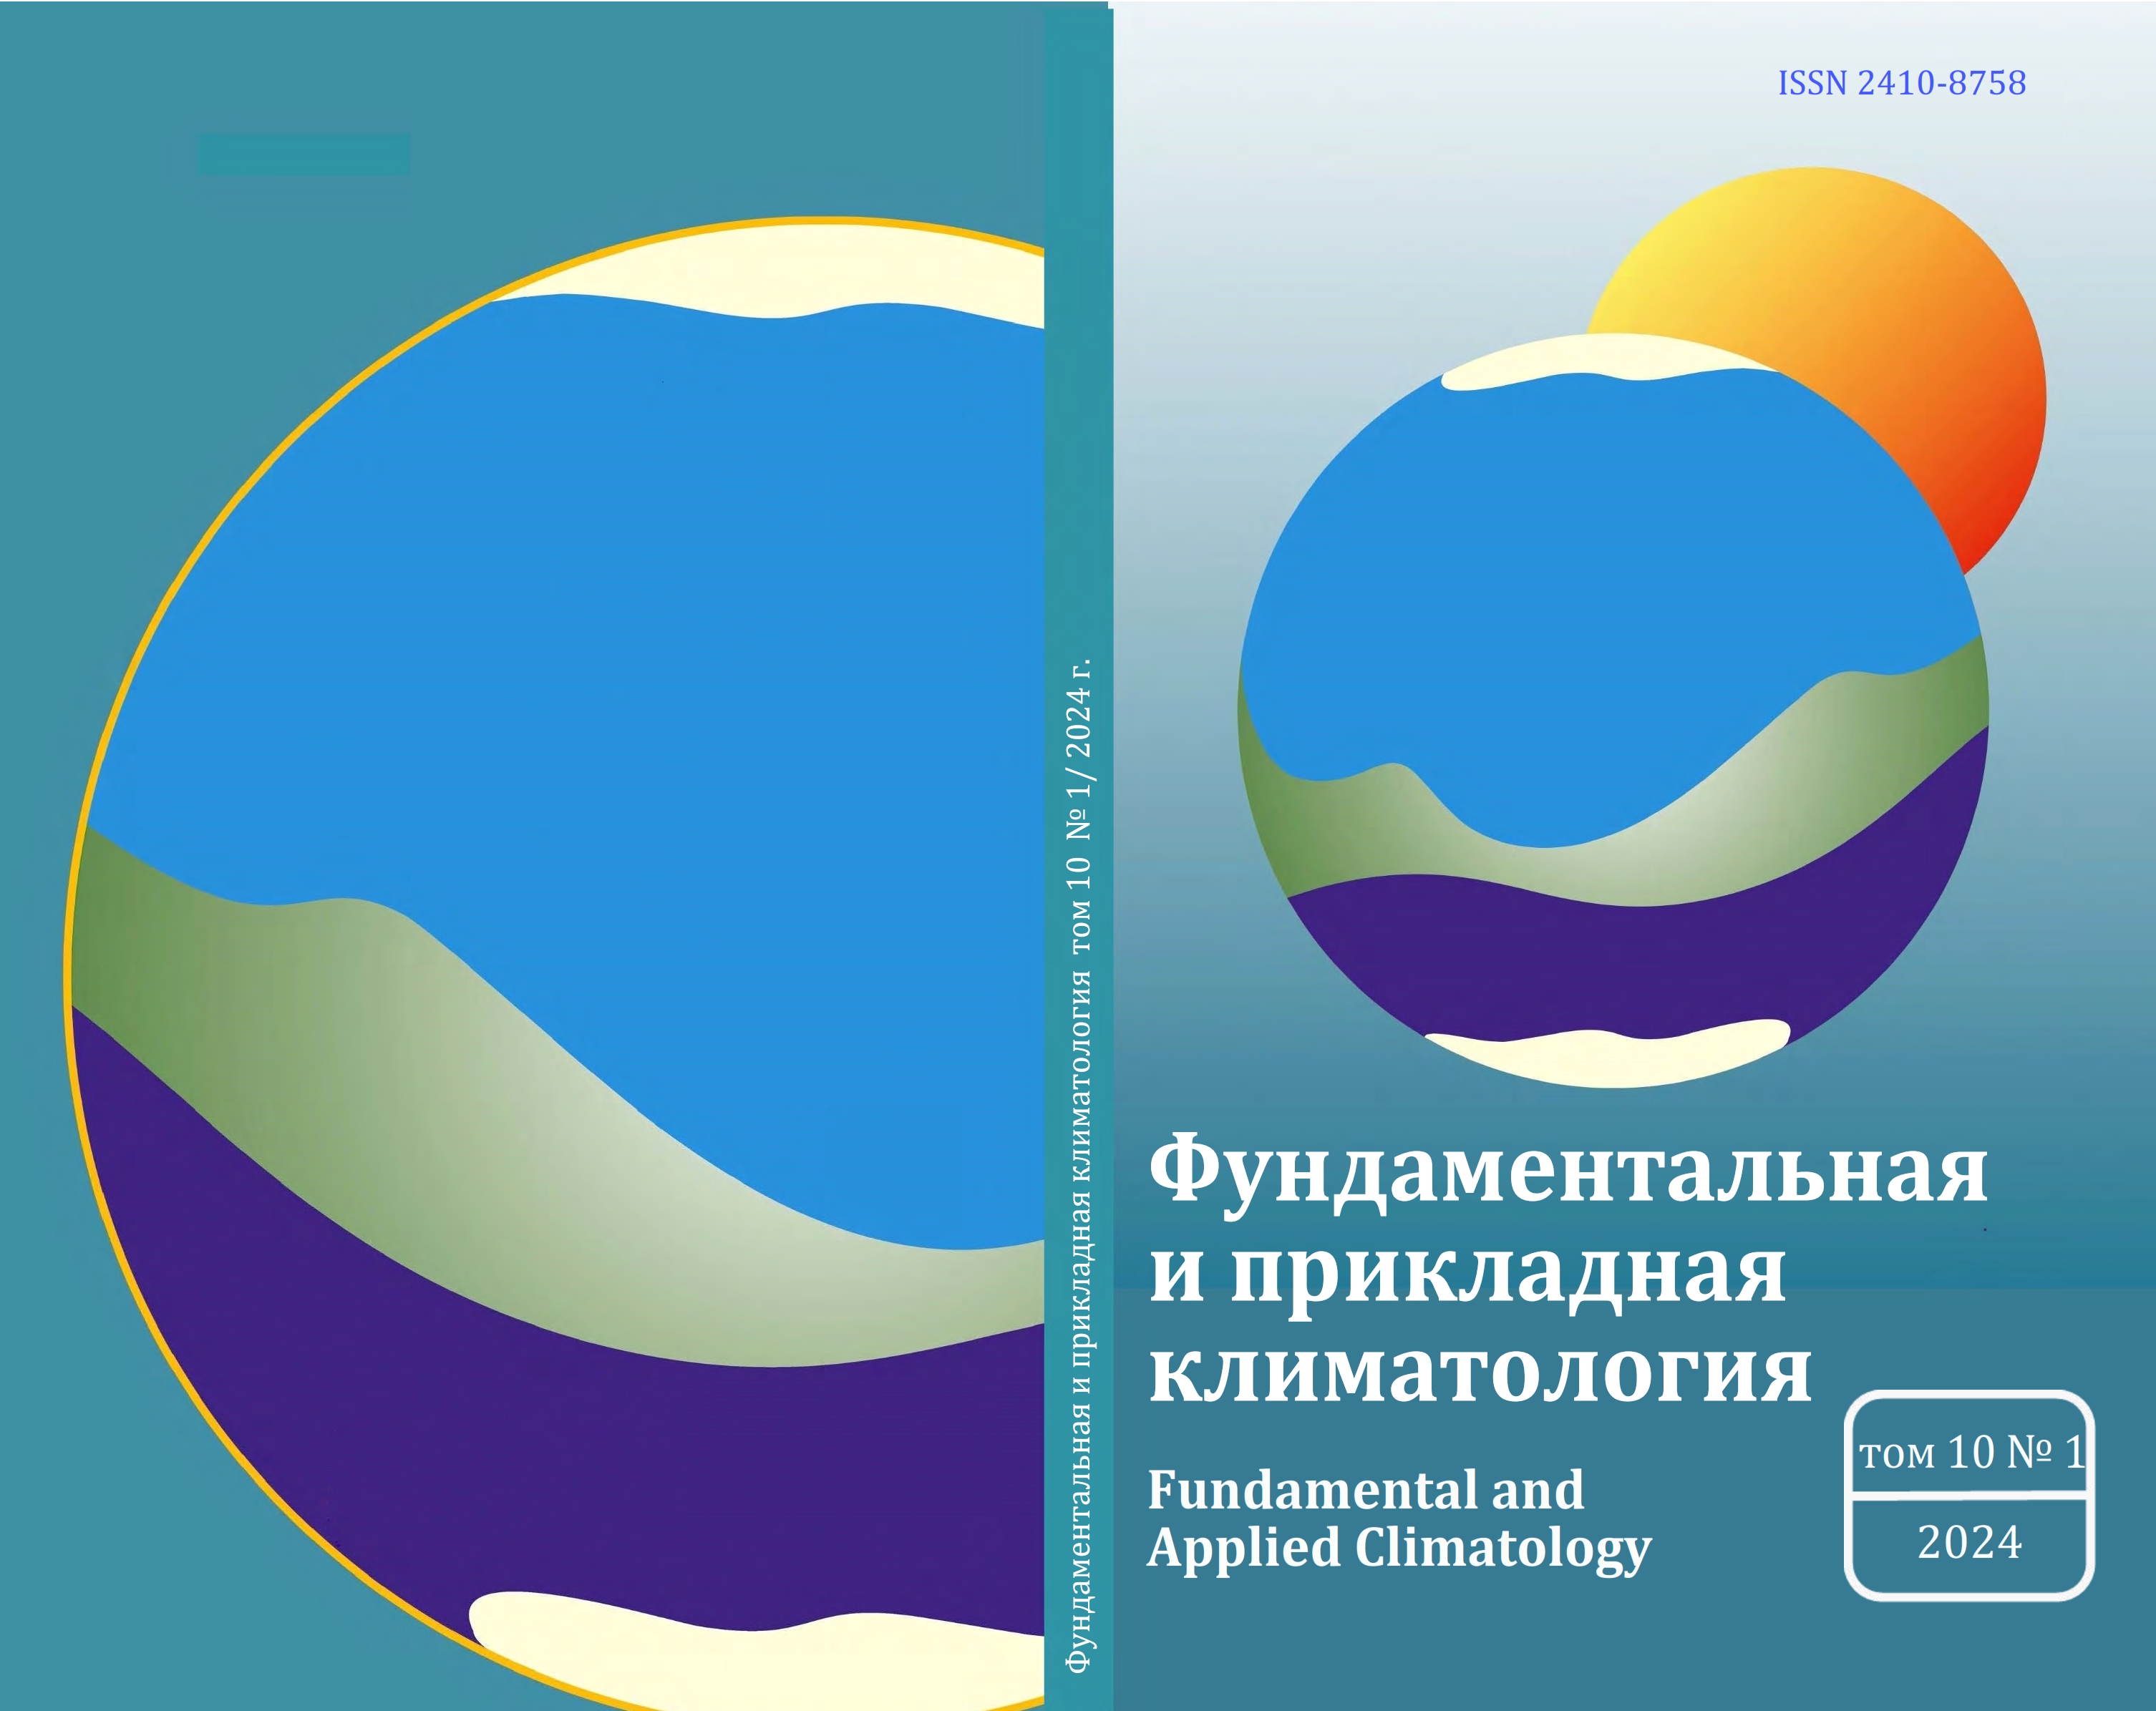 					View Vol. 10 No. 1 (2024): Fundamental and applied climatology 
				